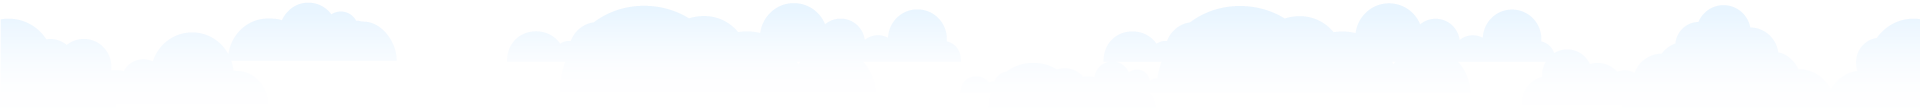 bg-silhouette-3-clouds-first.png